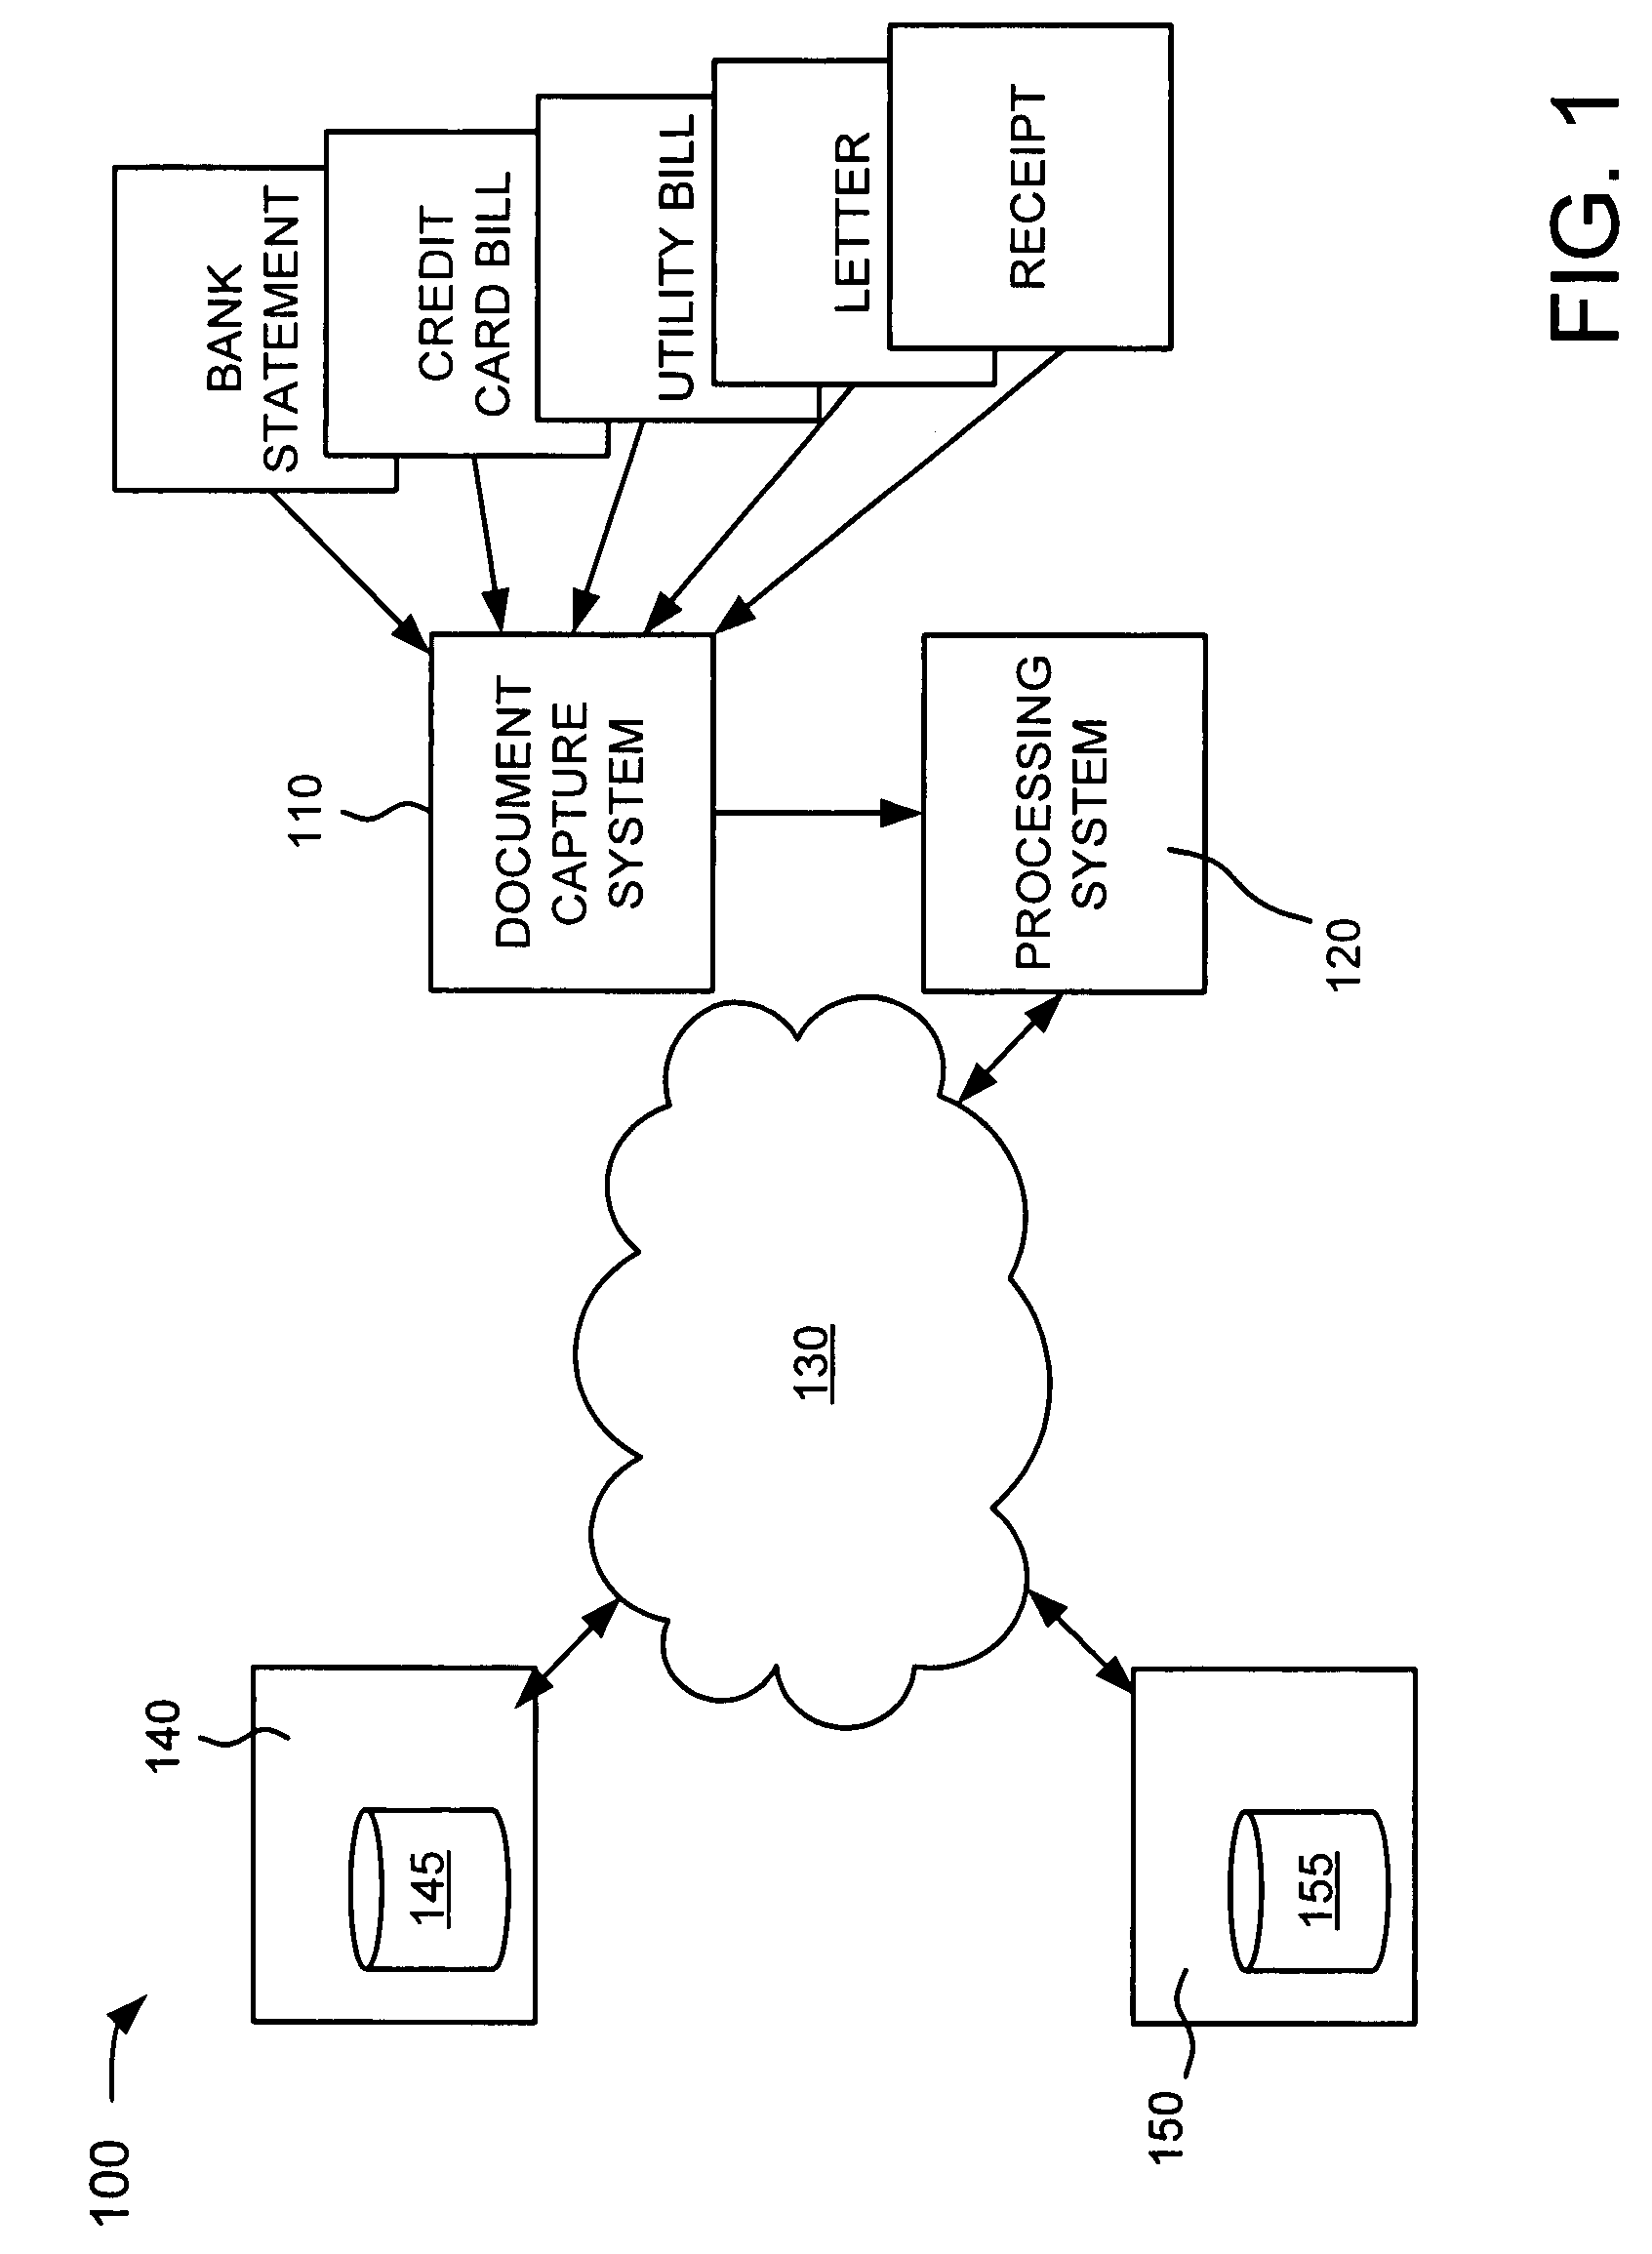 Document archiving system